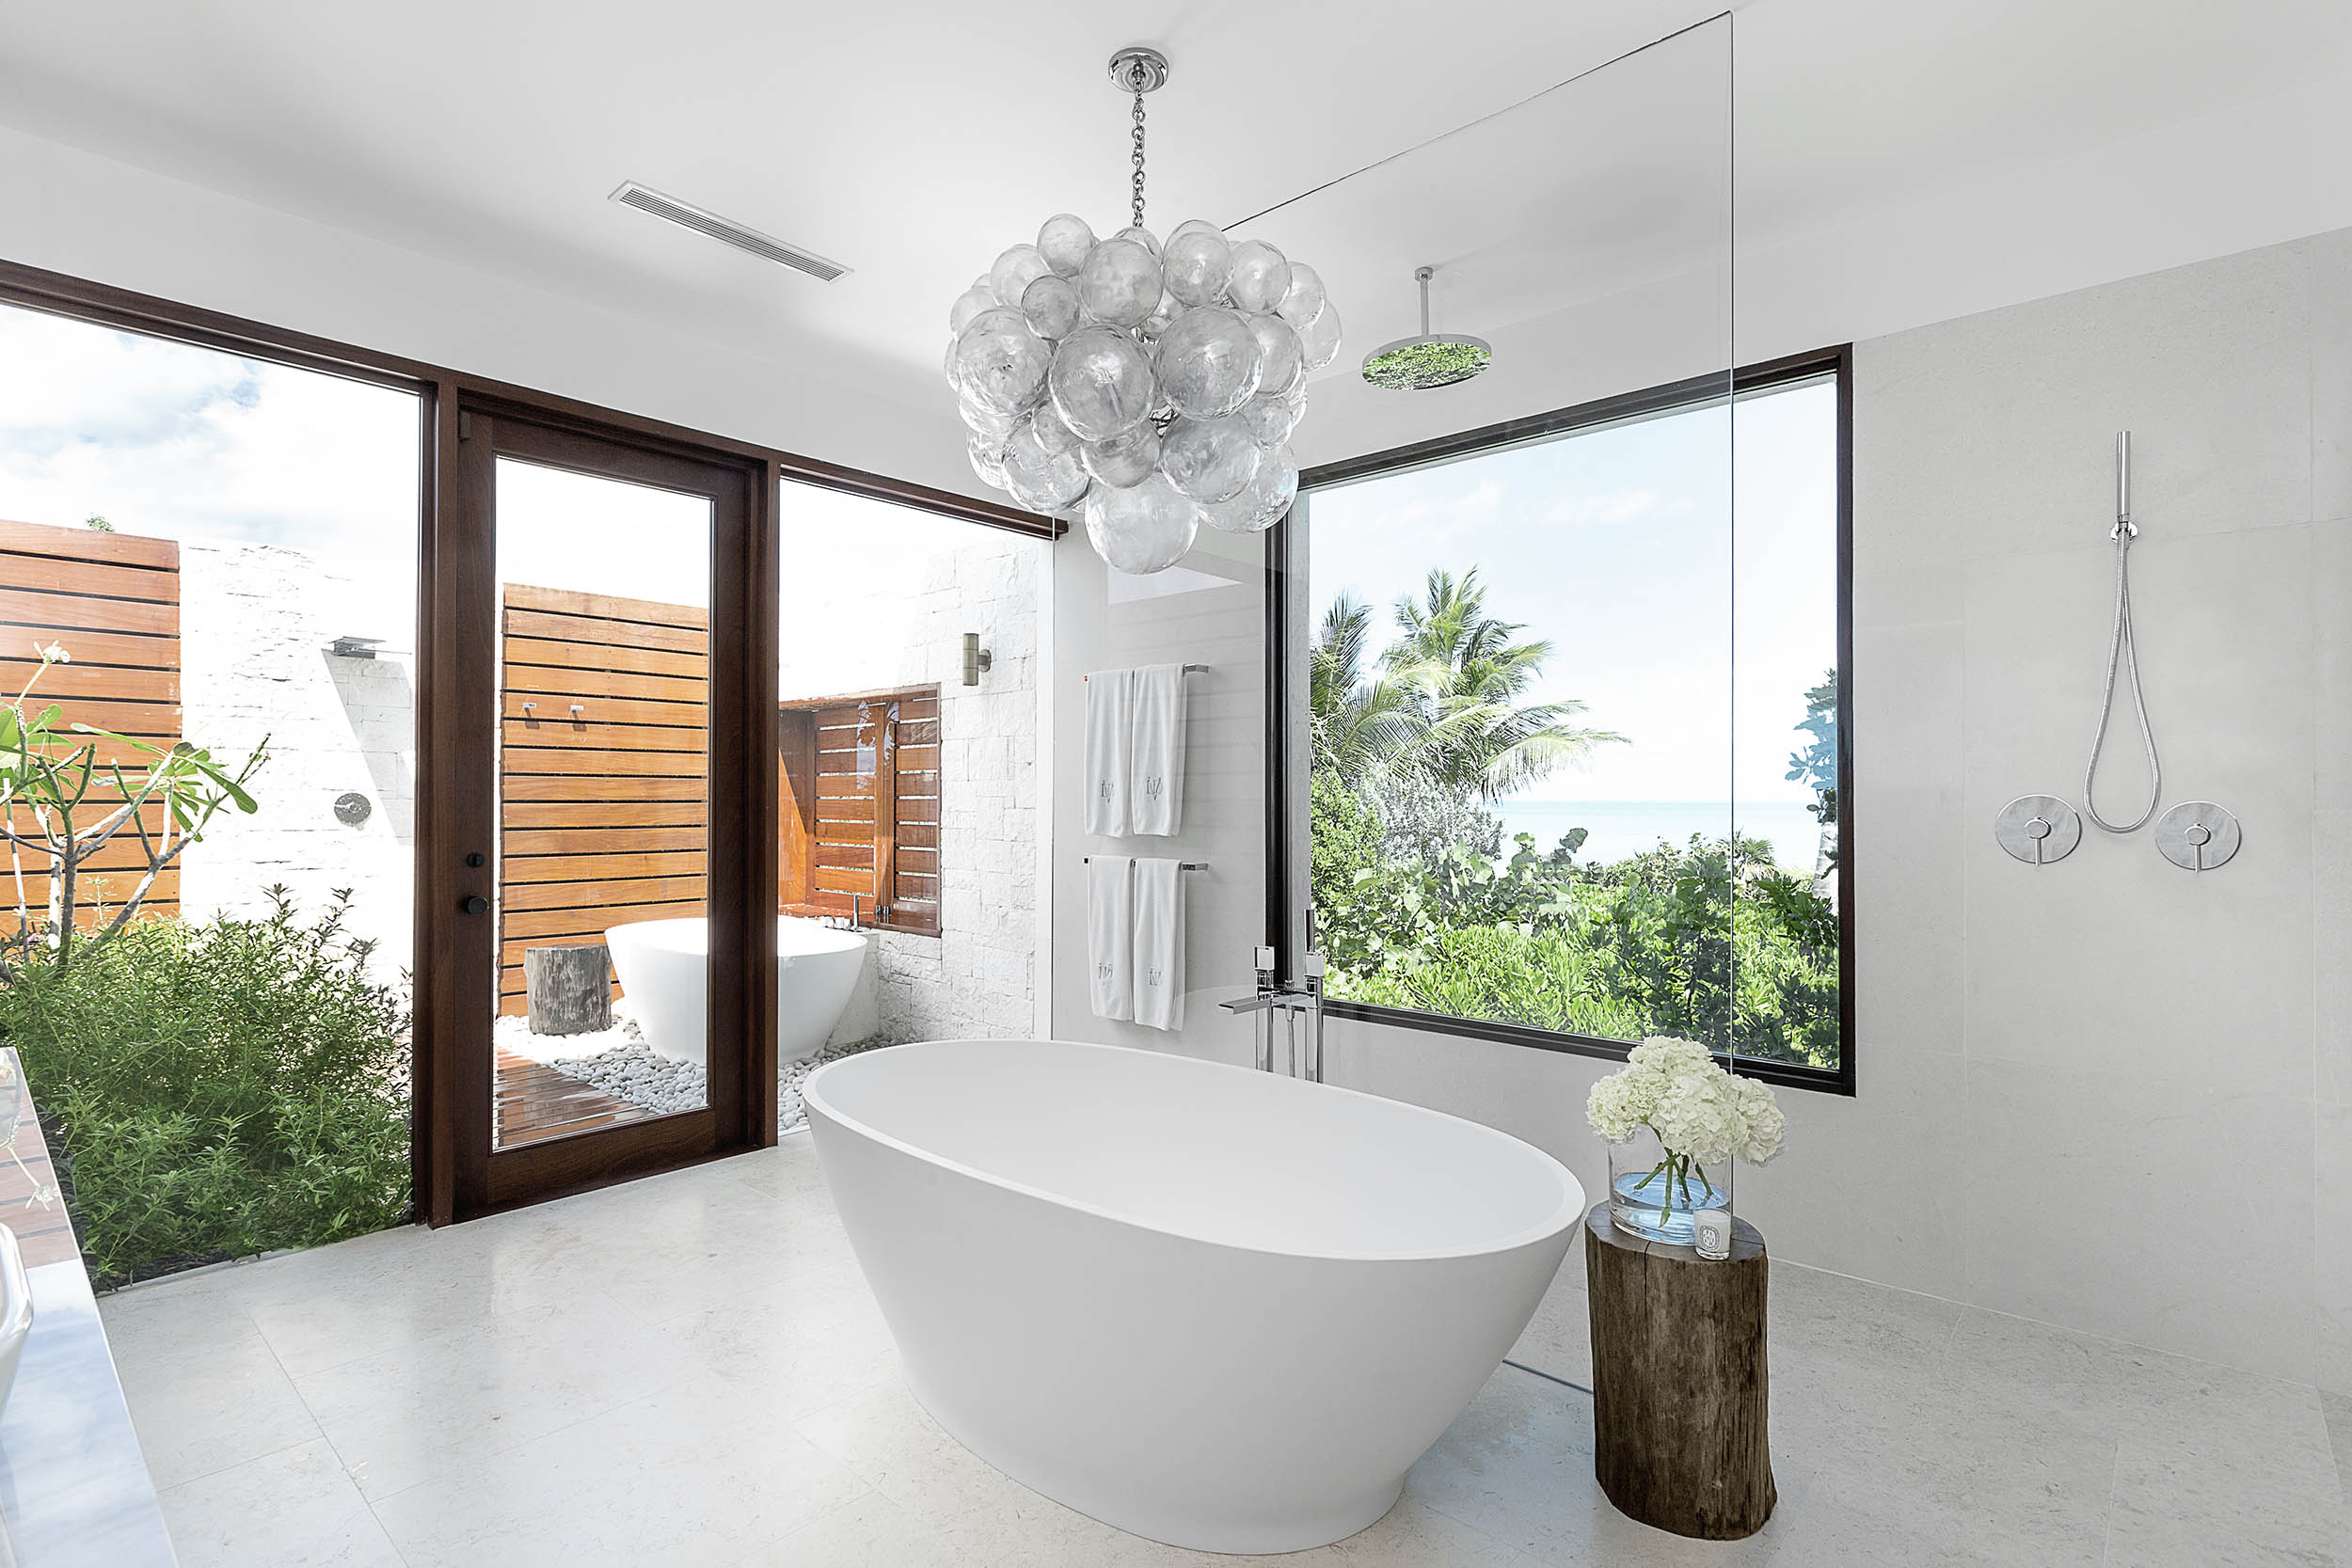 La Dolce Vita - view of one of the bathrooms with outdoor shower and bath tub